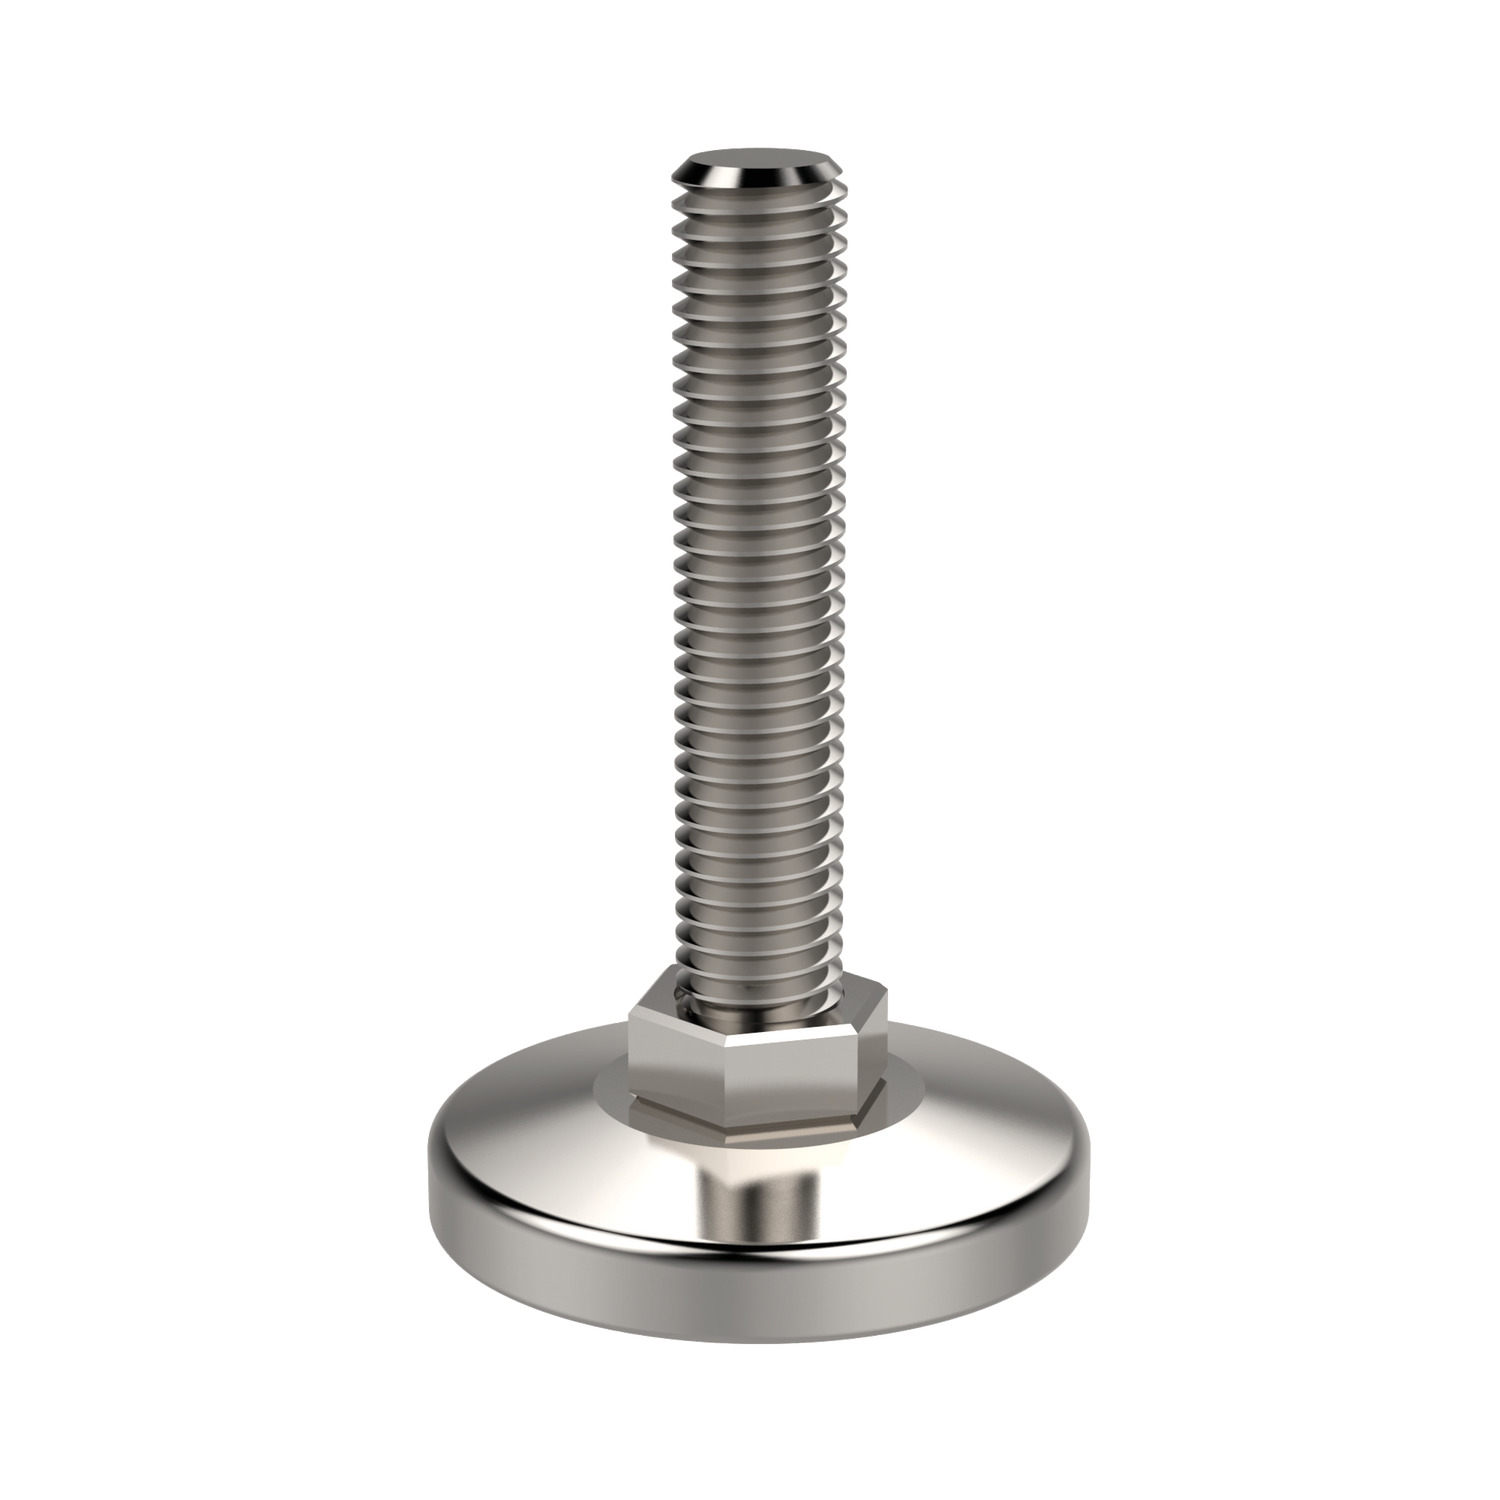 Mini Levelling Feet Stainless steel (AISI 304, AISI 316 on request) mini levelling feet suitable for medium loads. Due to dealing with heavier loads thread bolt only allows freedom of movement of 3°.